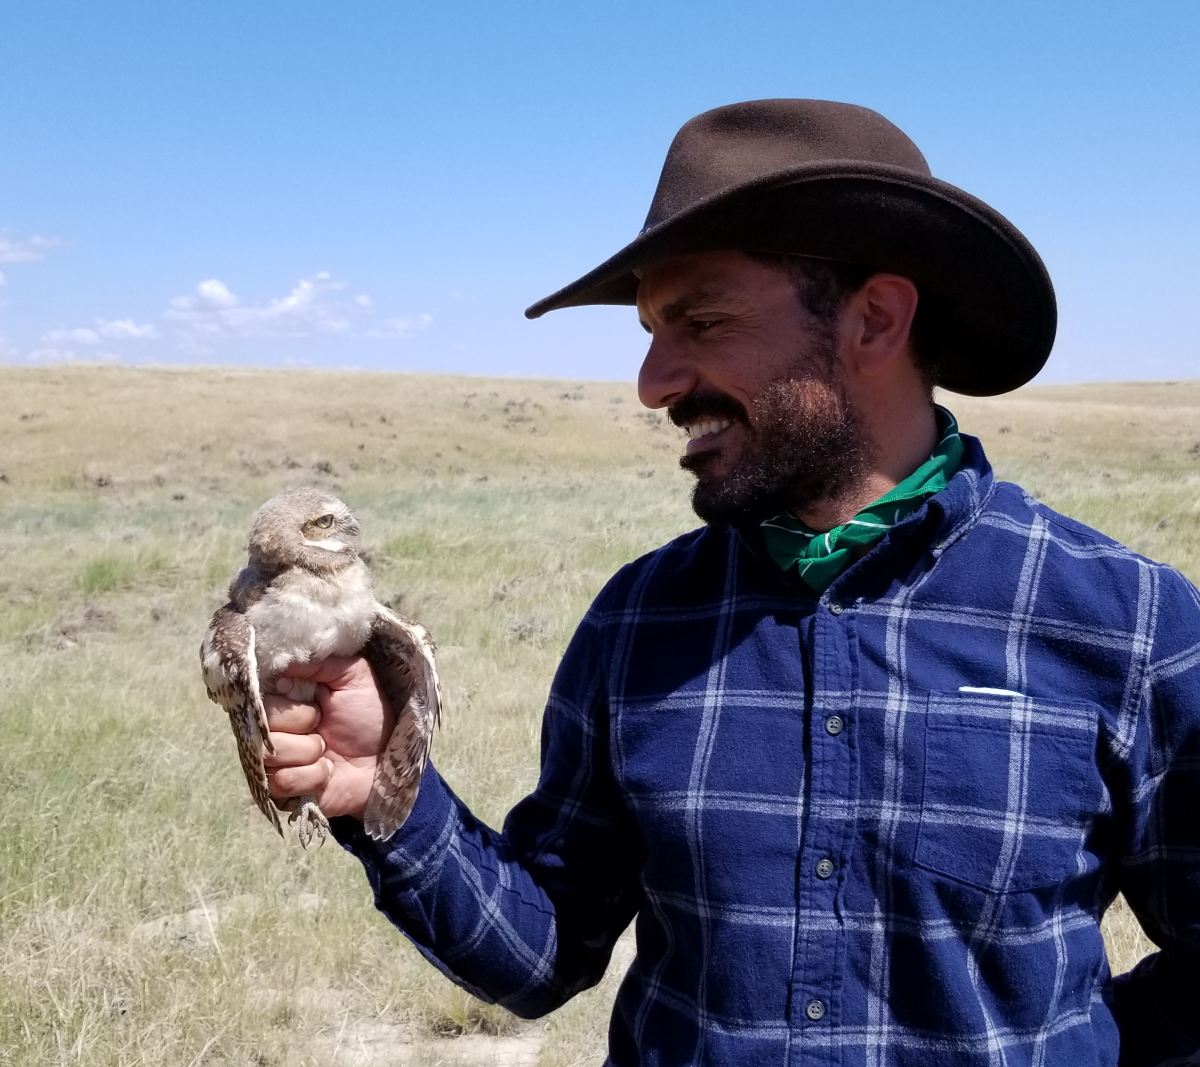 Wolf in the desert holding a small own while wearing a blue plaid shirt, green bandana, and brown hat